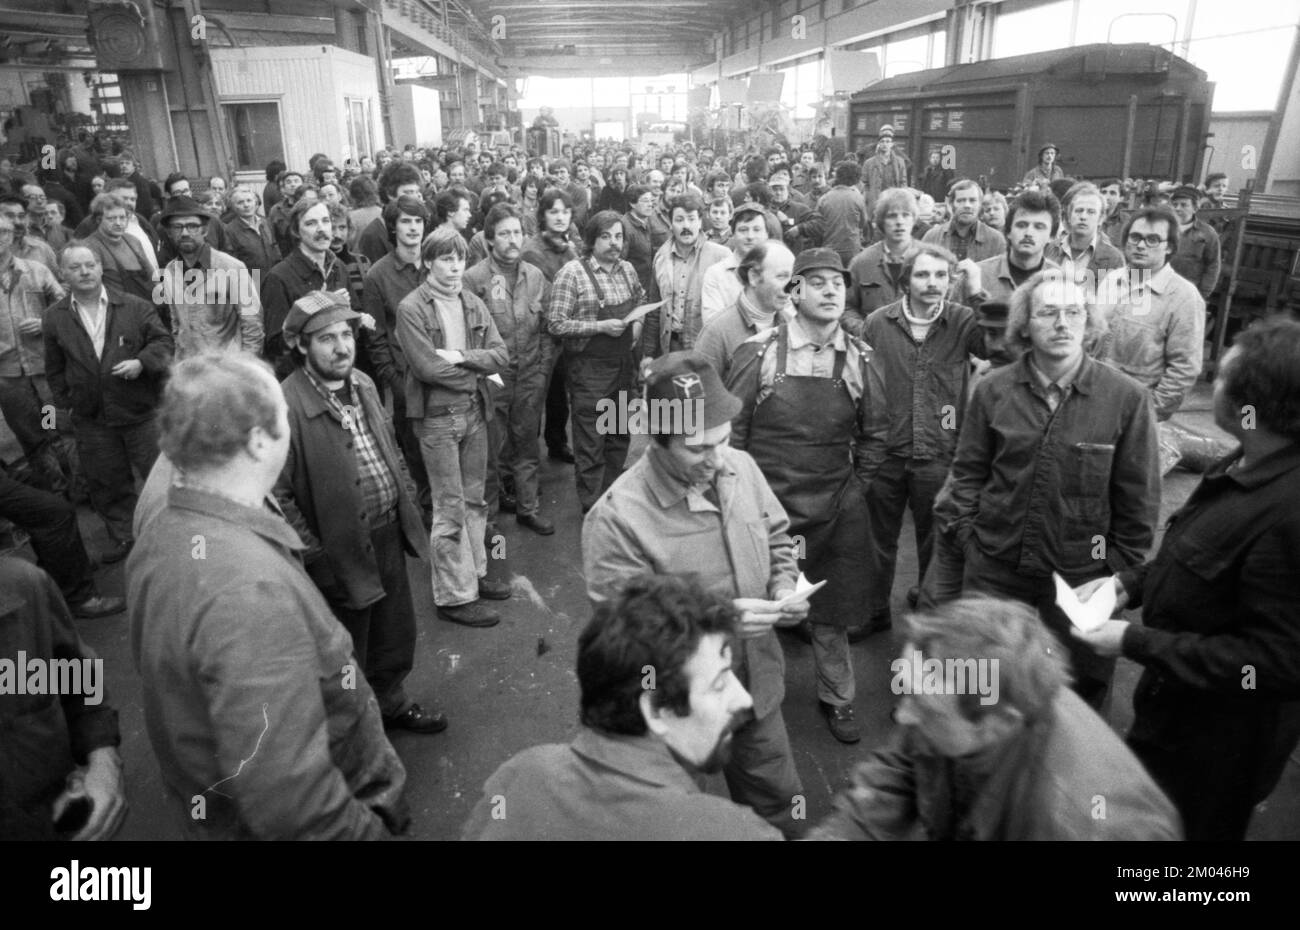 Warning strike by IG Metall in the collective bargaining dispute at Orenstein & paddock on 05.03.1981 in Dortmund, Germany, Europe Stock Photo